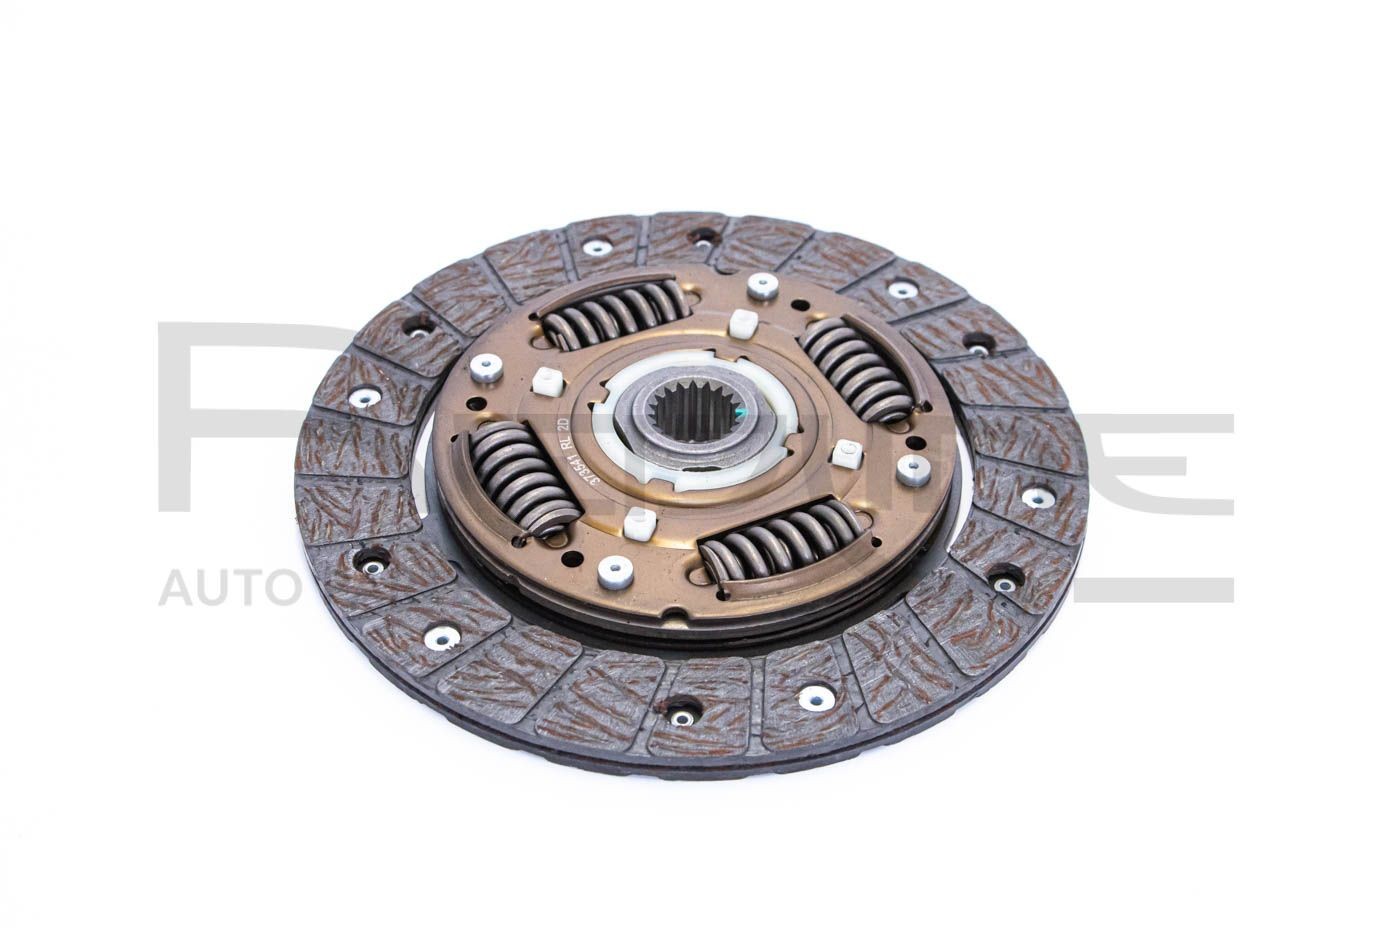 RED-LINE 25TO104 Clutch replacement kit 190mm